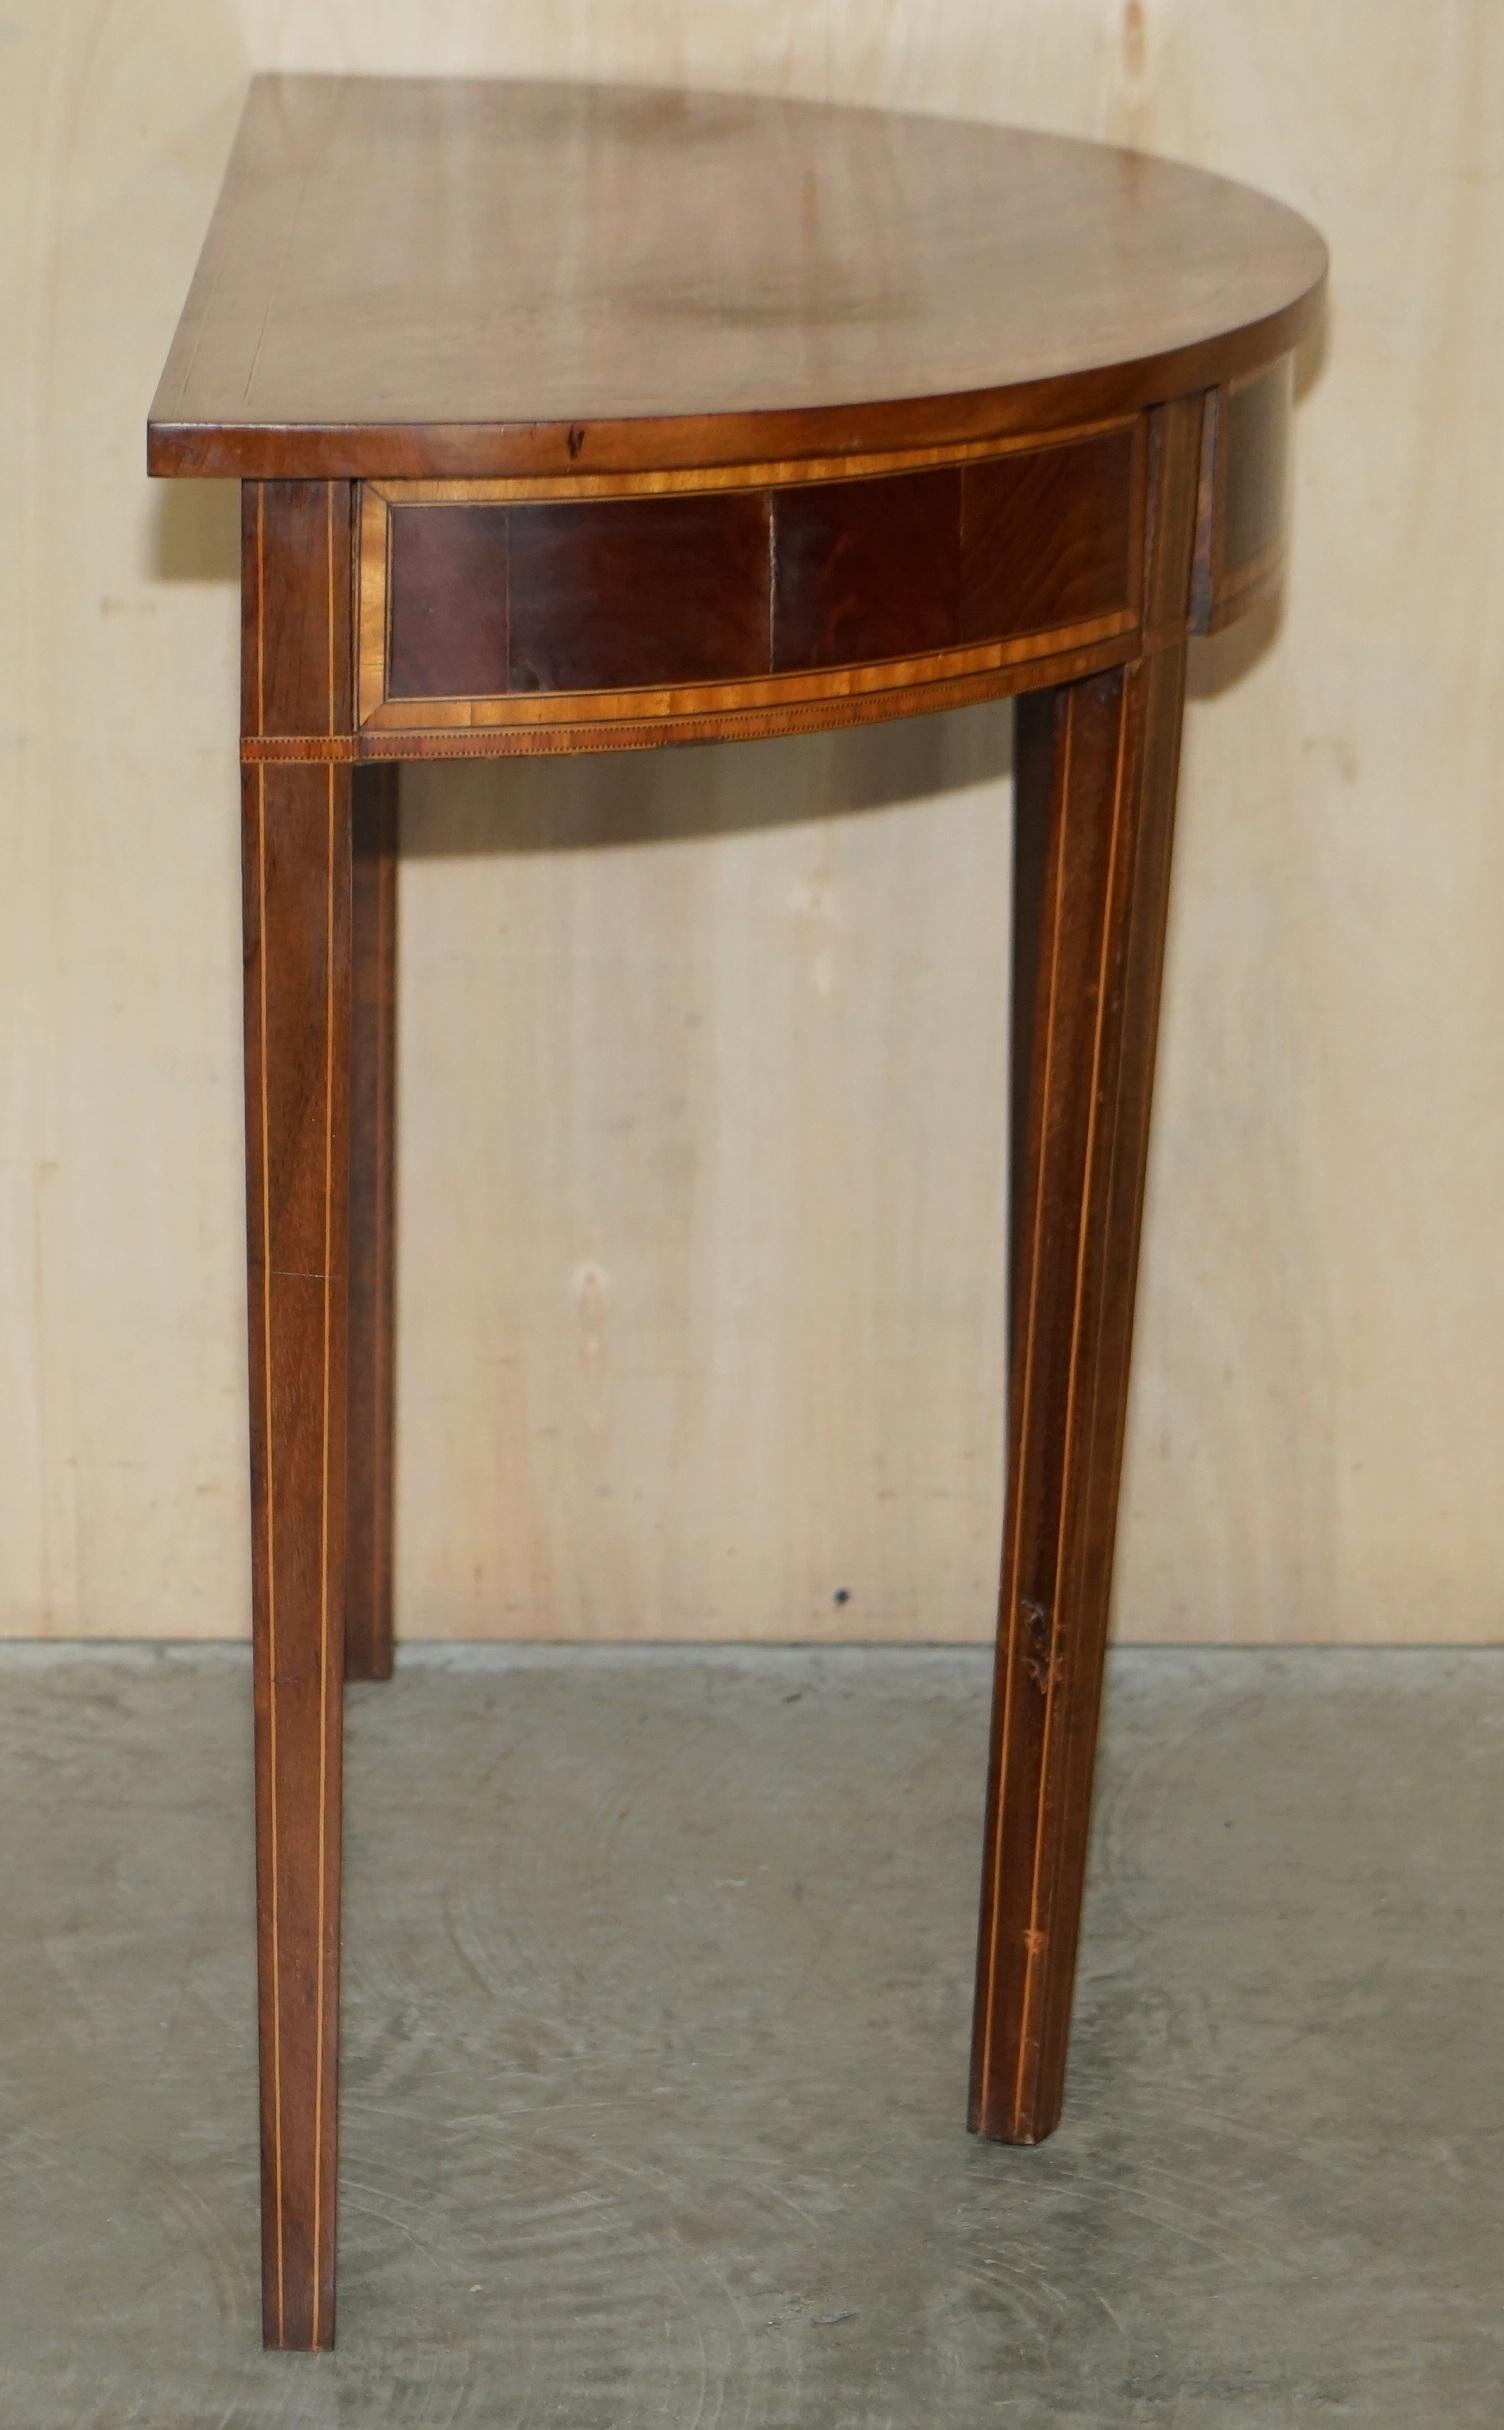 ANTIQUE ViCTORIAN HARDWOOD & WALNUT DEMI LUNE HALF MOON ONE DRAWER CONSOLE TABLE For Sale 2